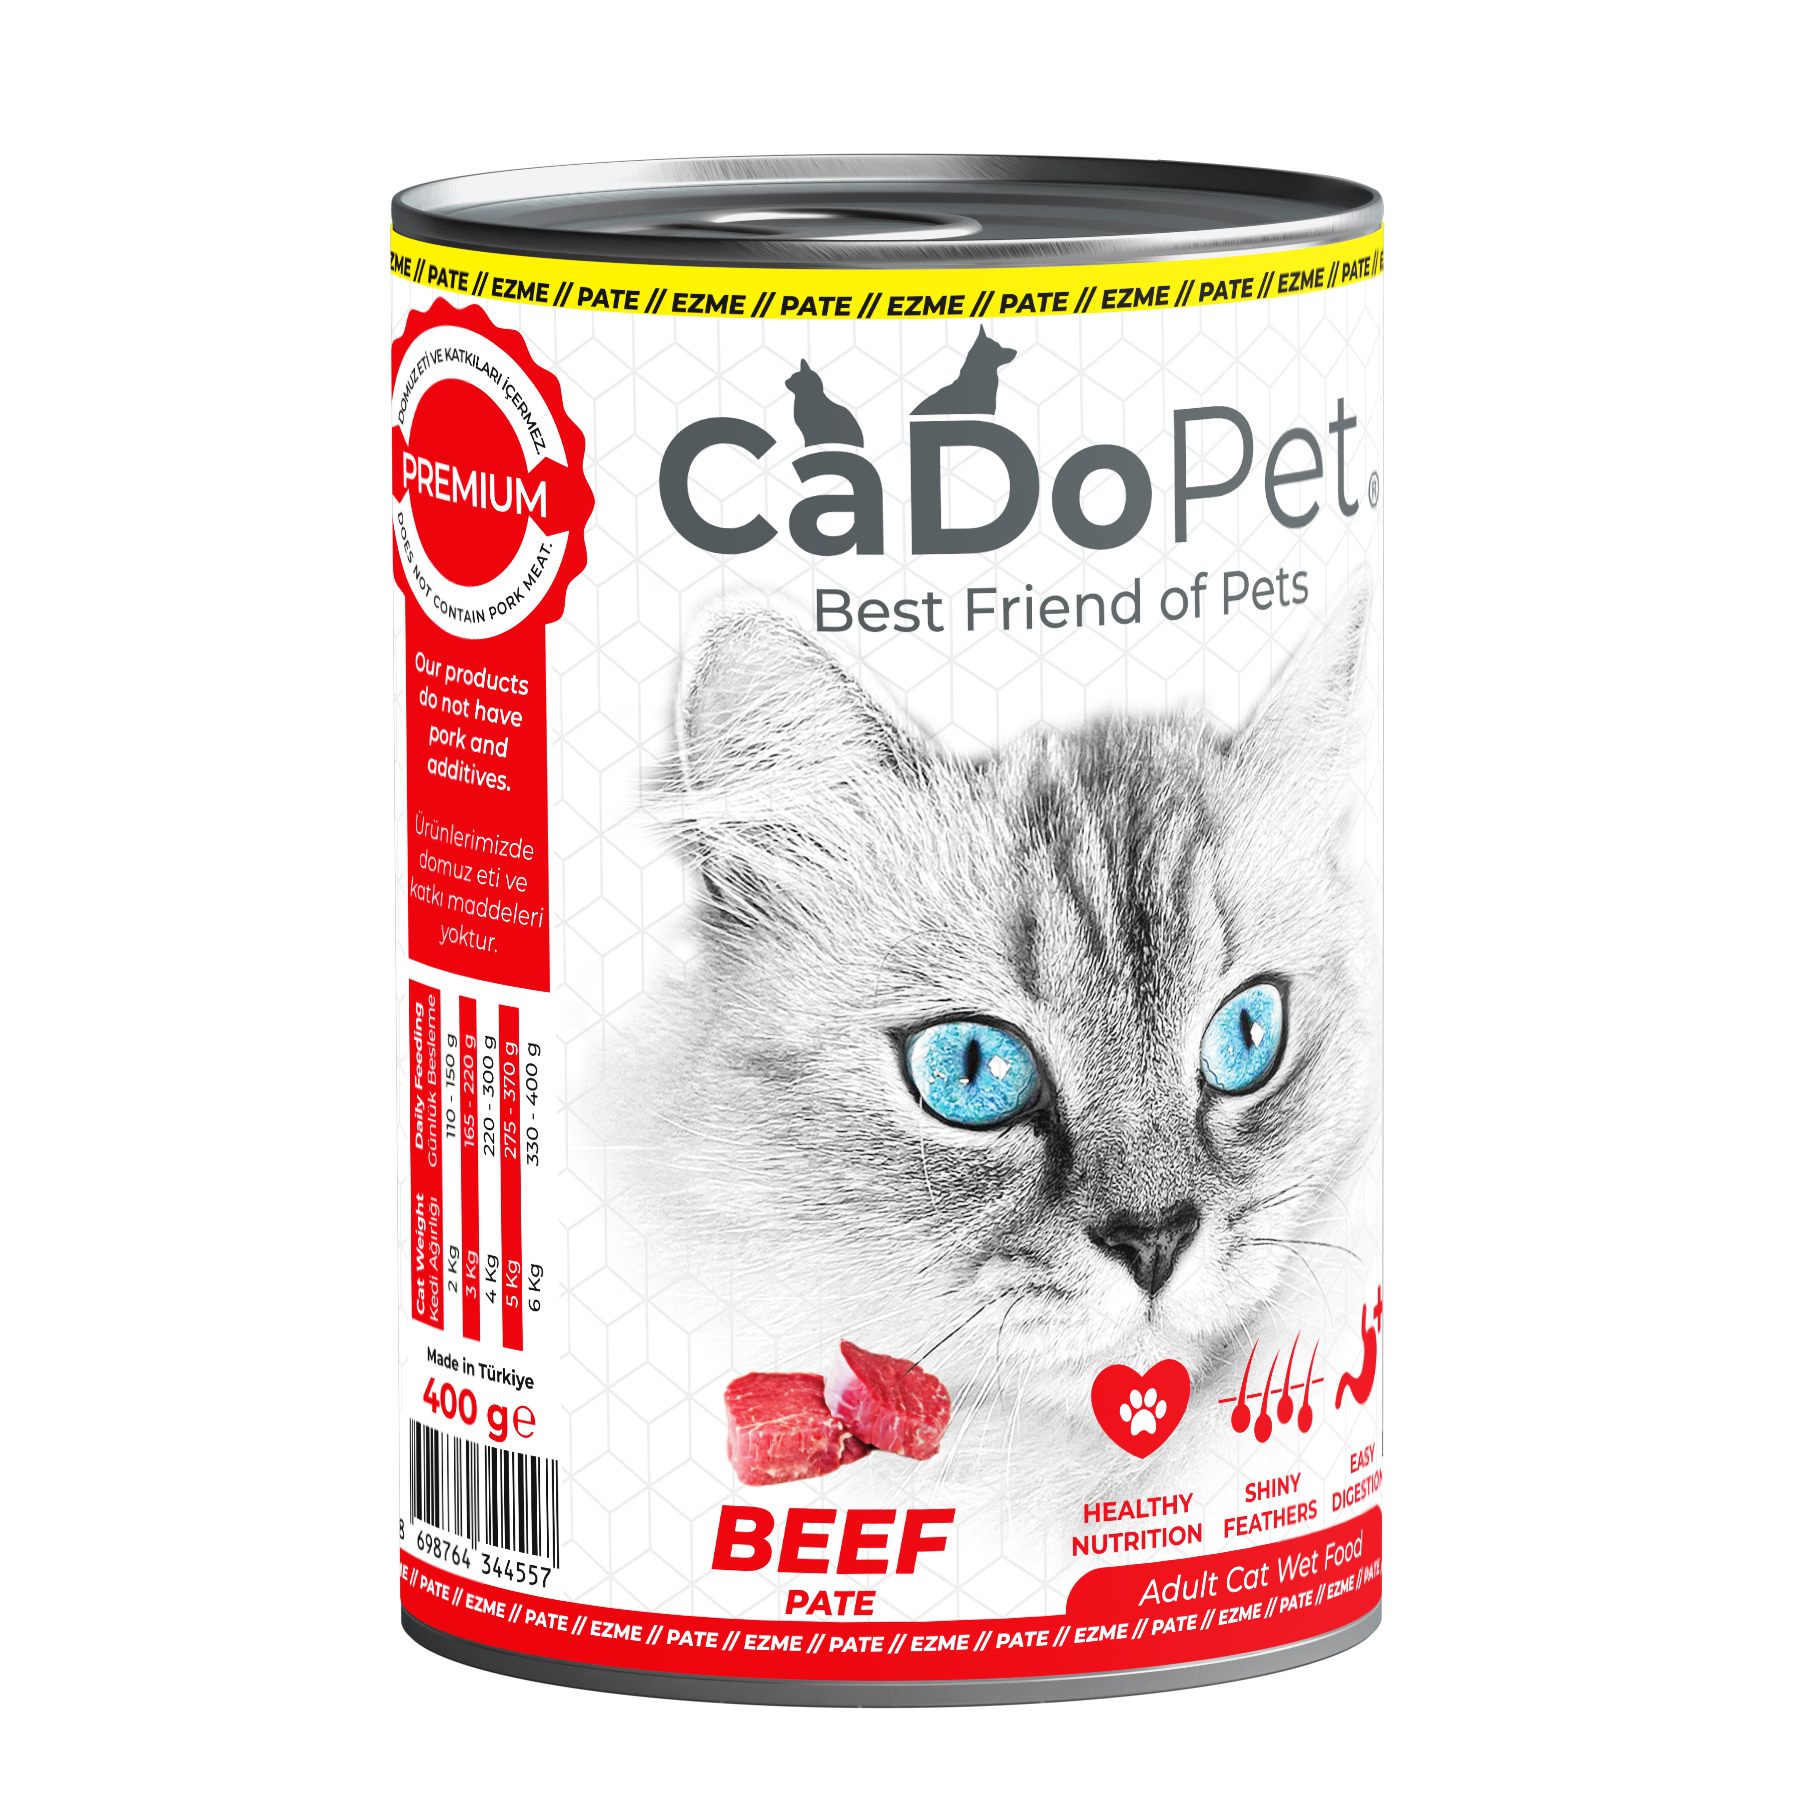 .Adult Cat Wet Food 400g with Beef Pate.